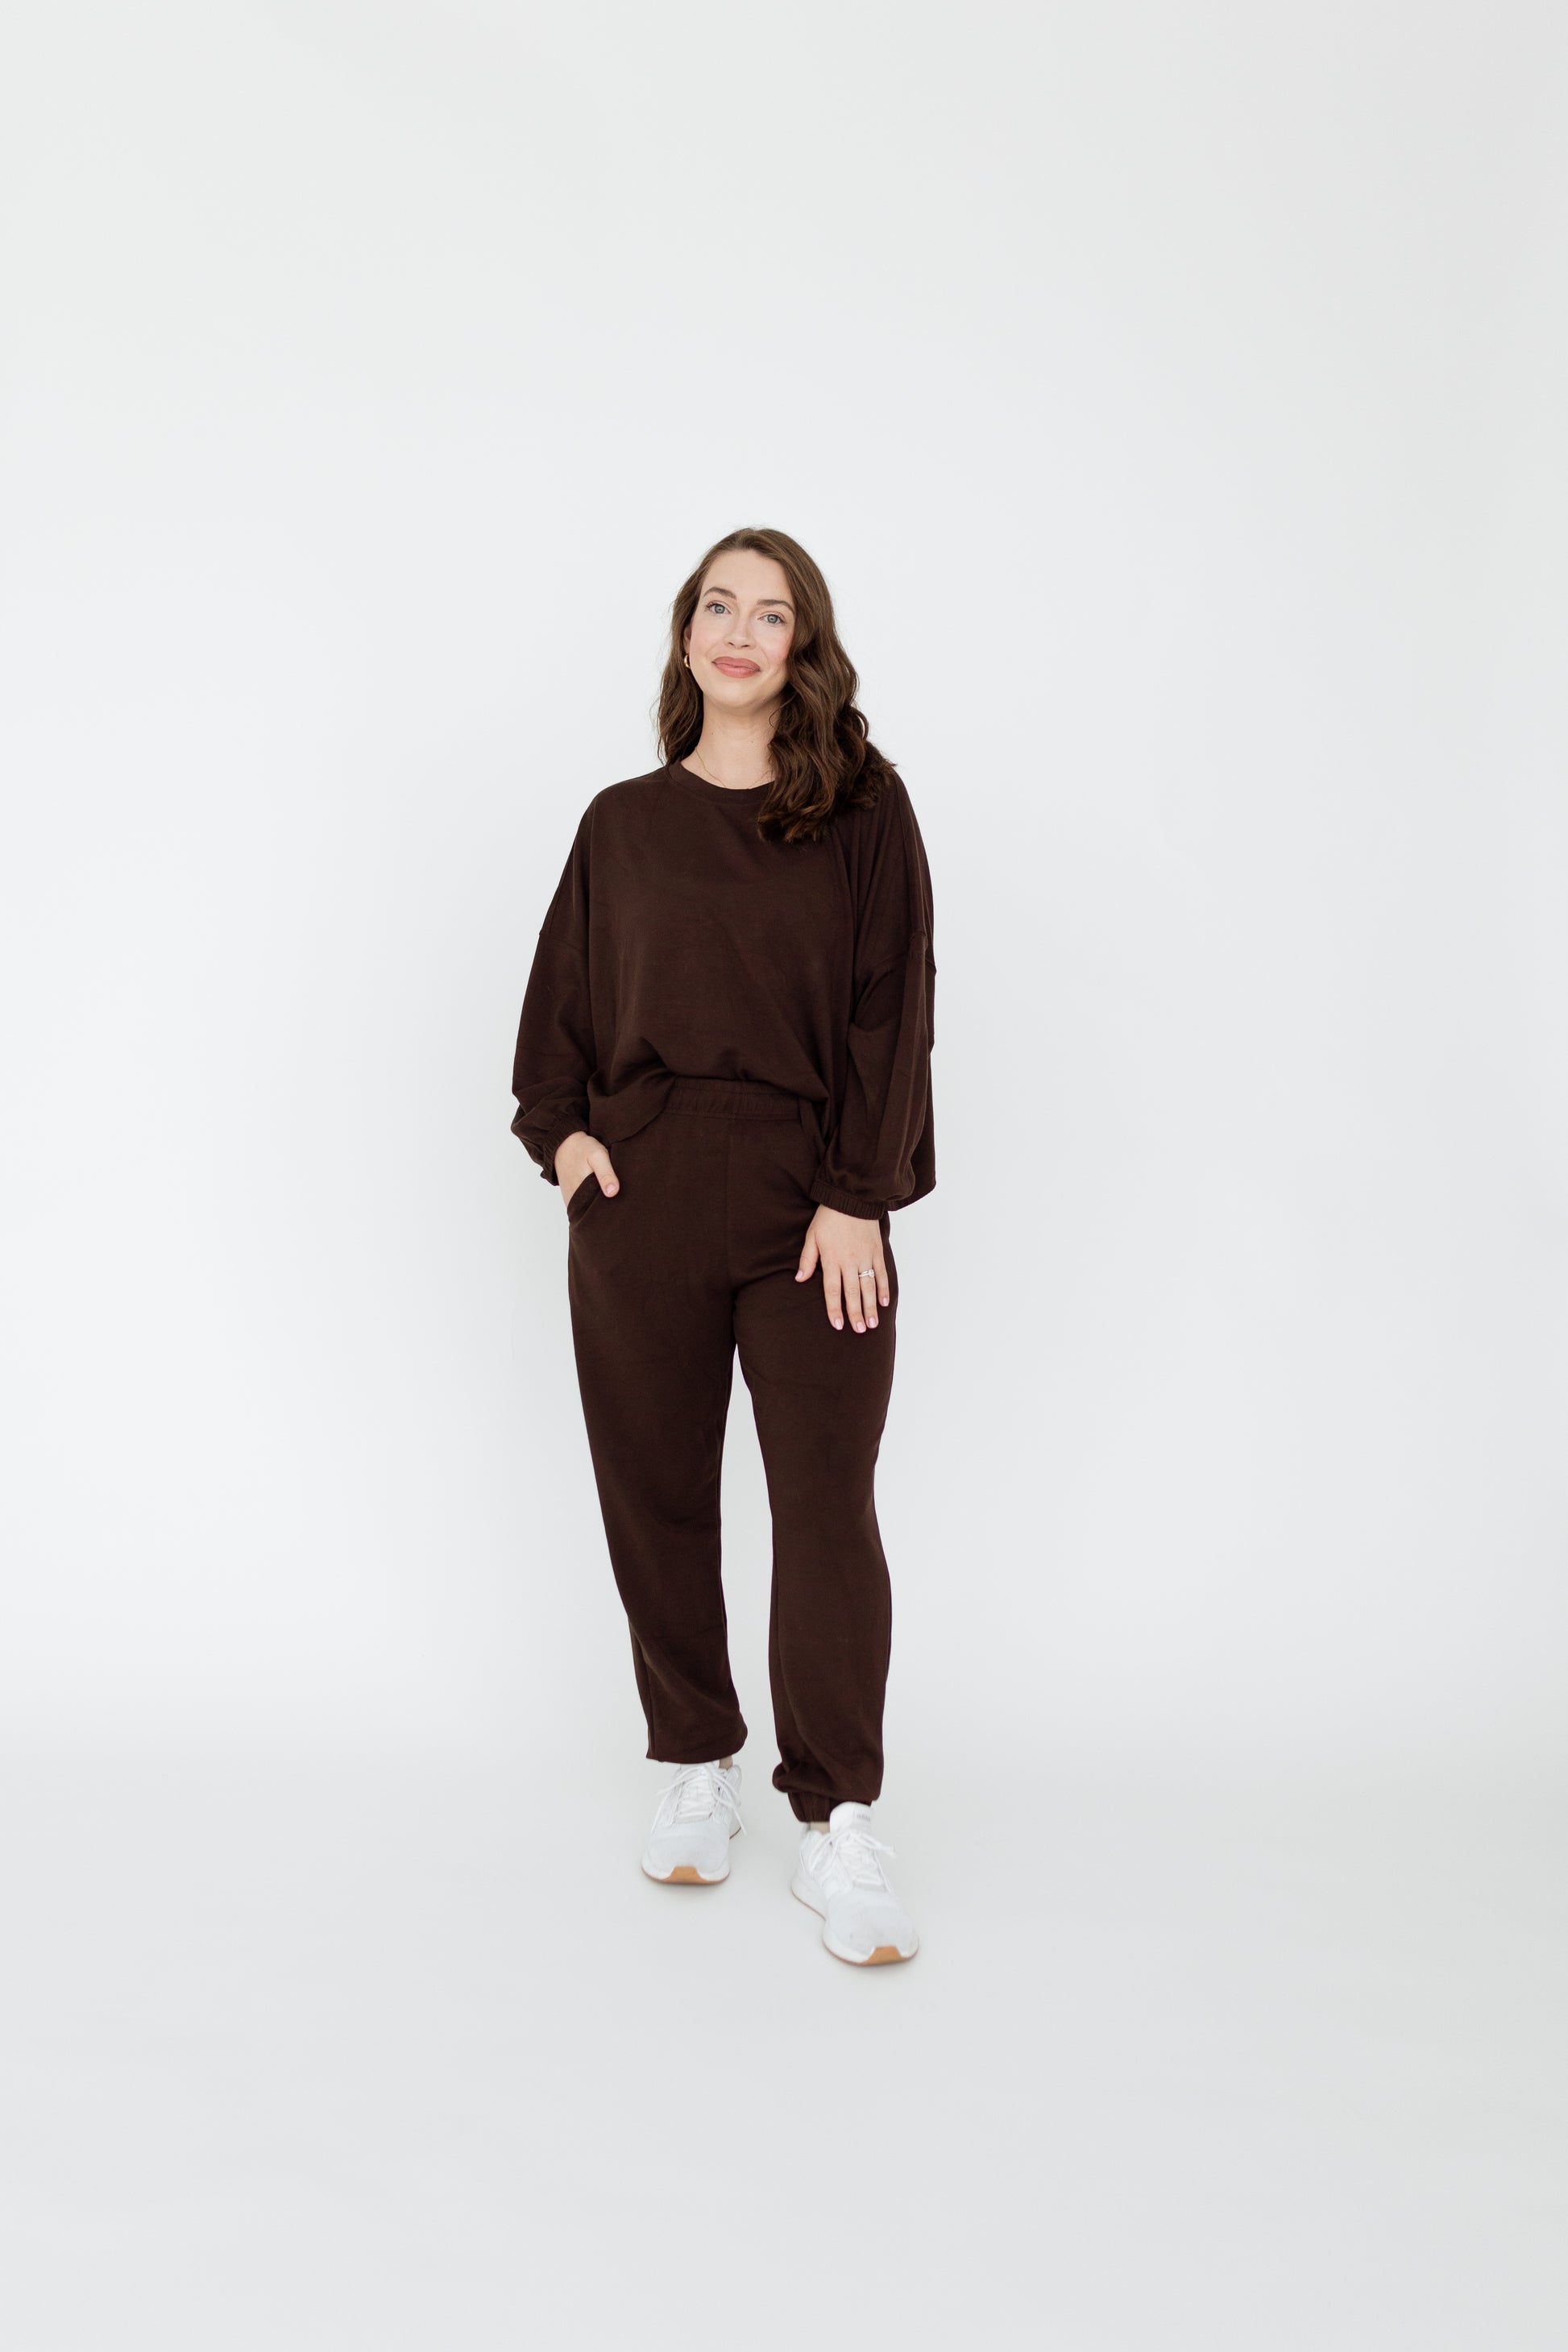 Cocoa Brown Neutral Luxury Lounge Set Athleisure Jogger and Pullover